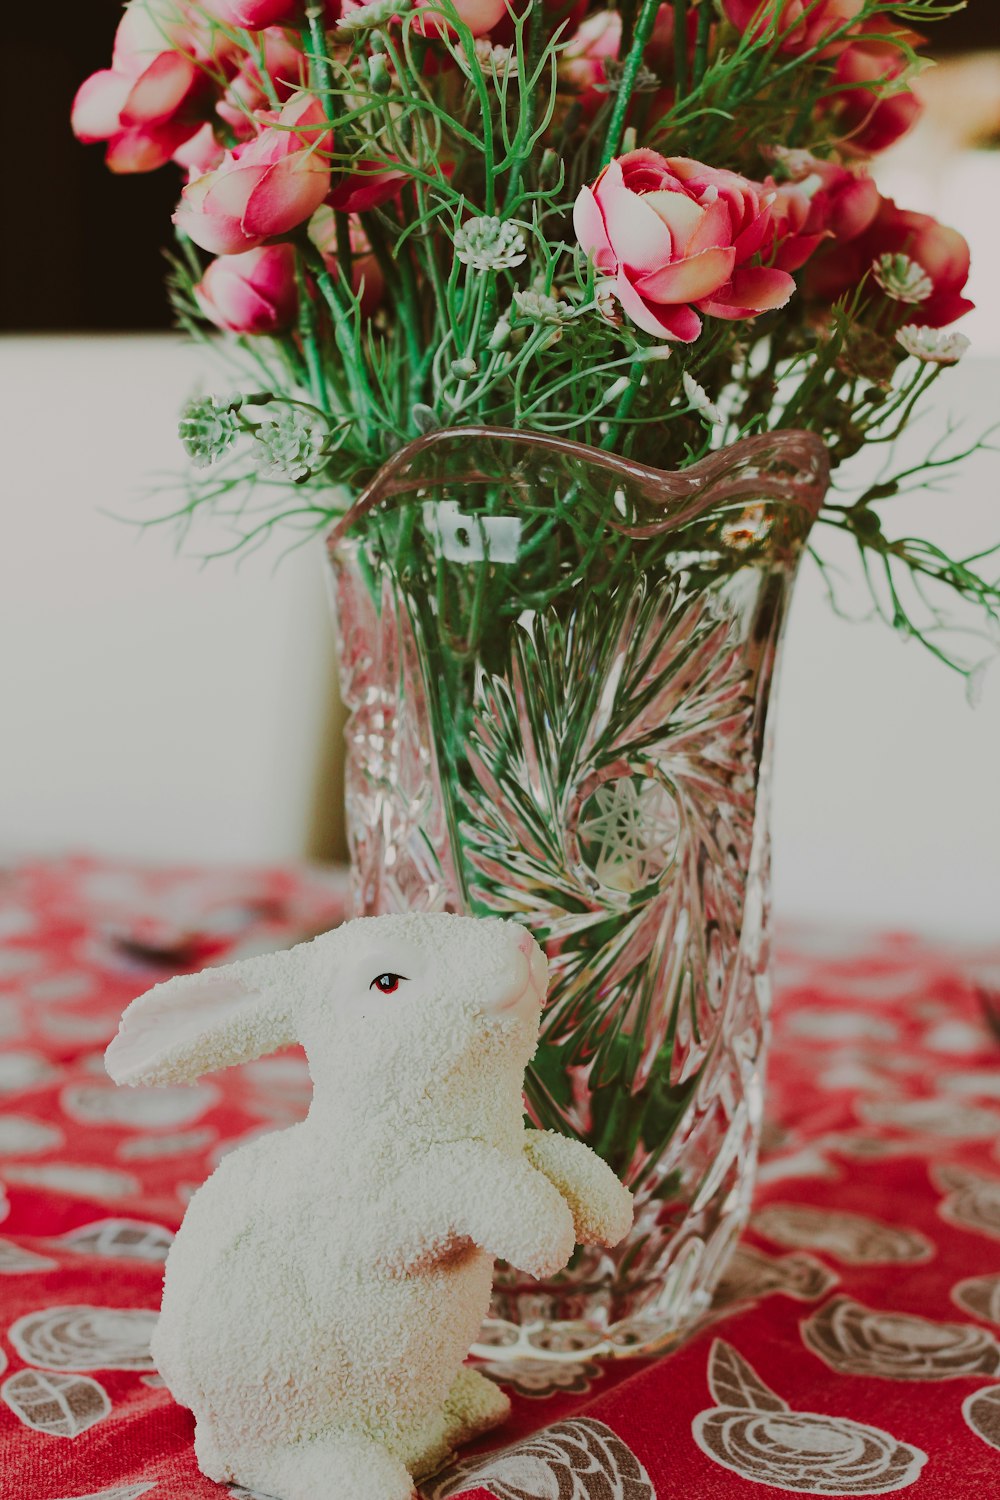 a vase filled with flowers and a white bunny figurine